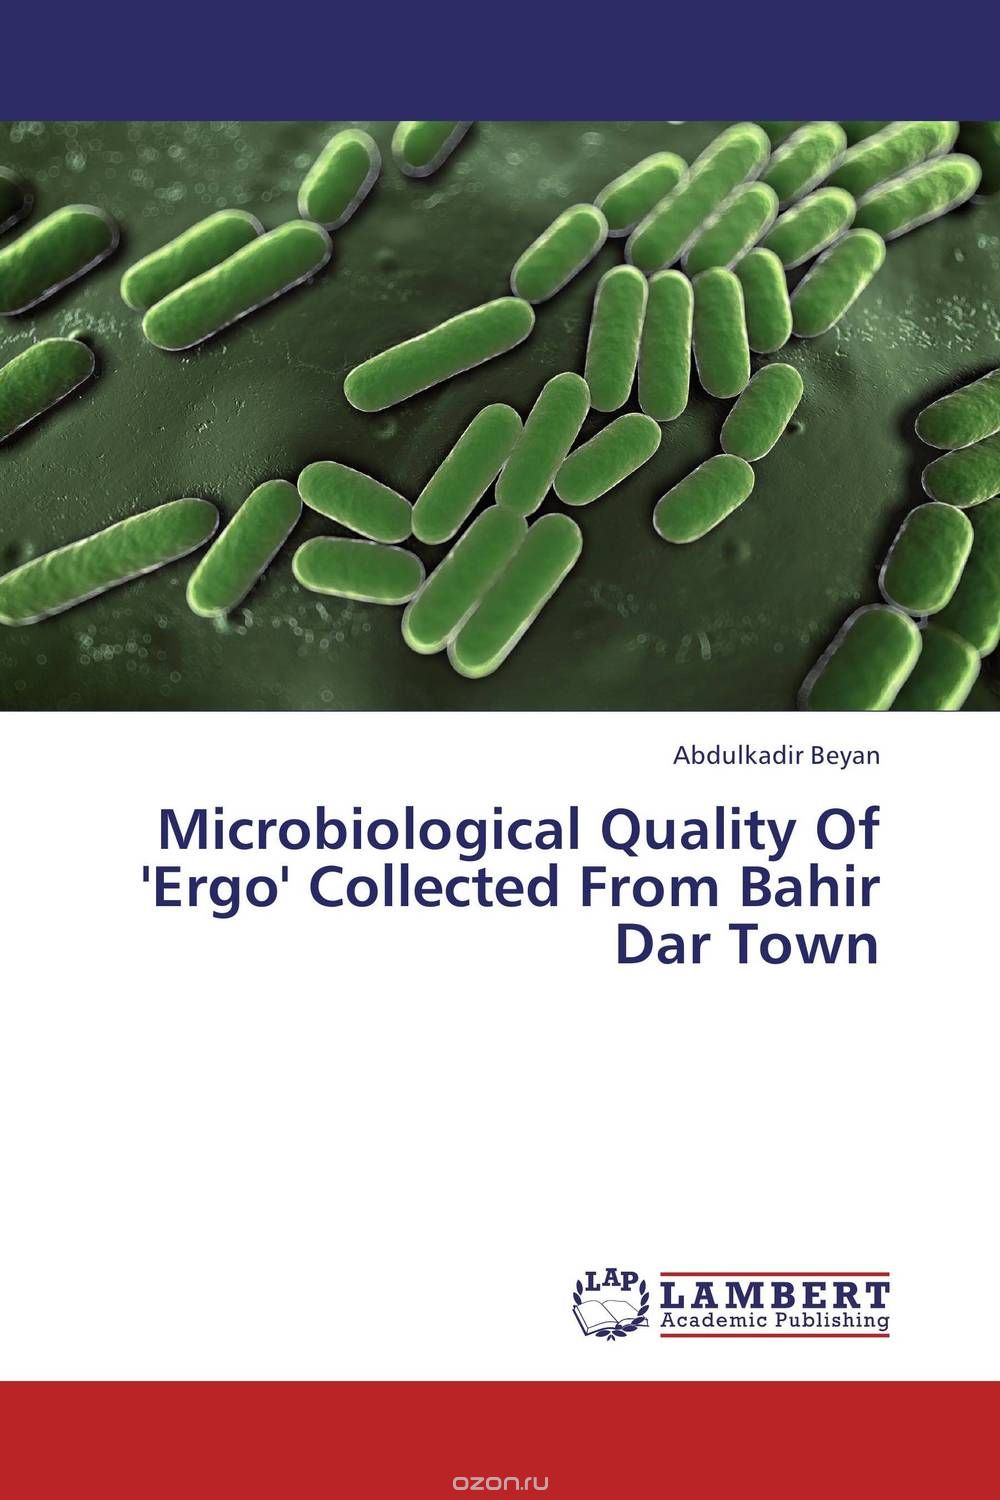 Microbiological Quality Of 'Ergo' Collected From Bahir Dar Town